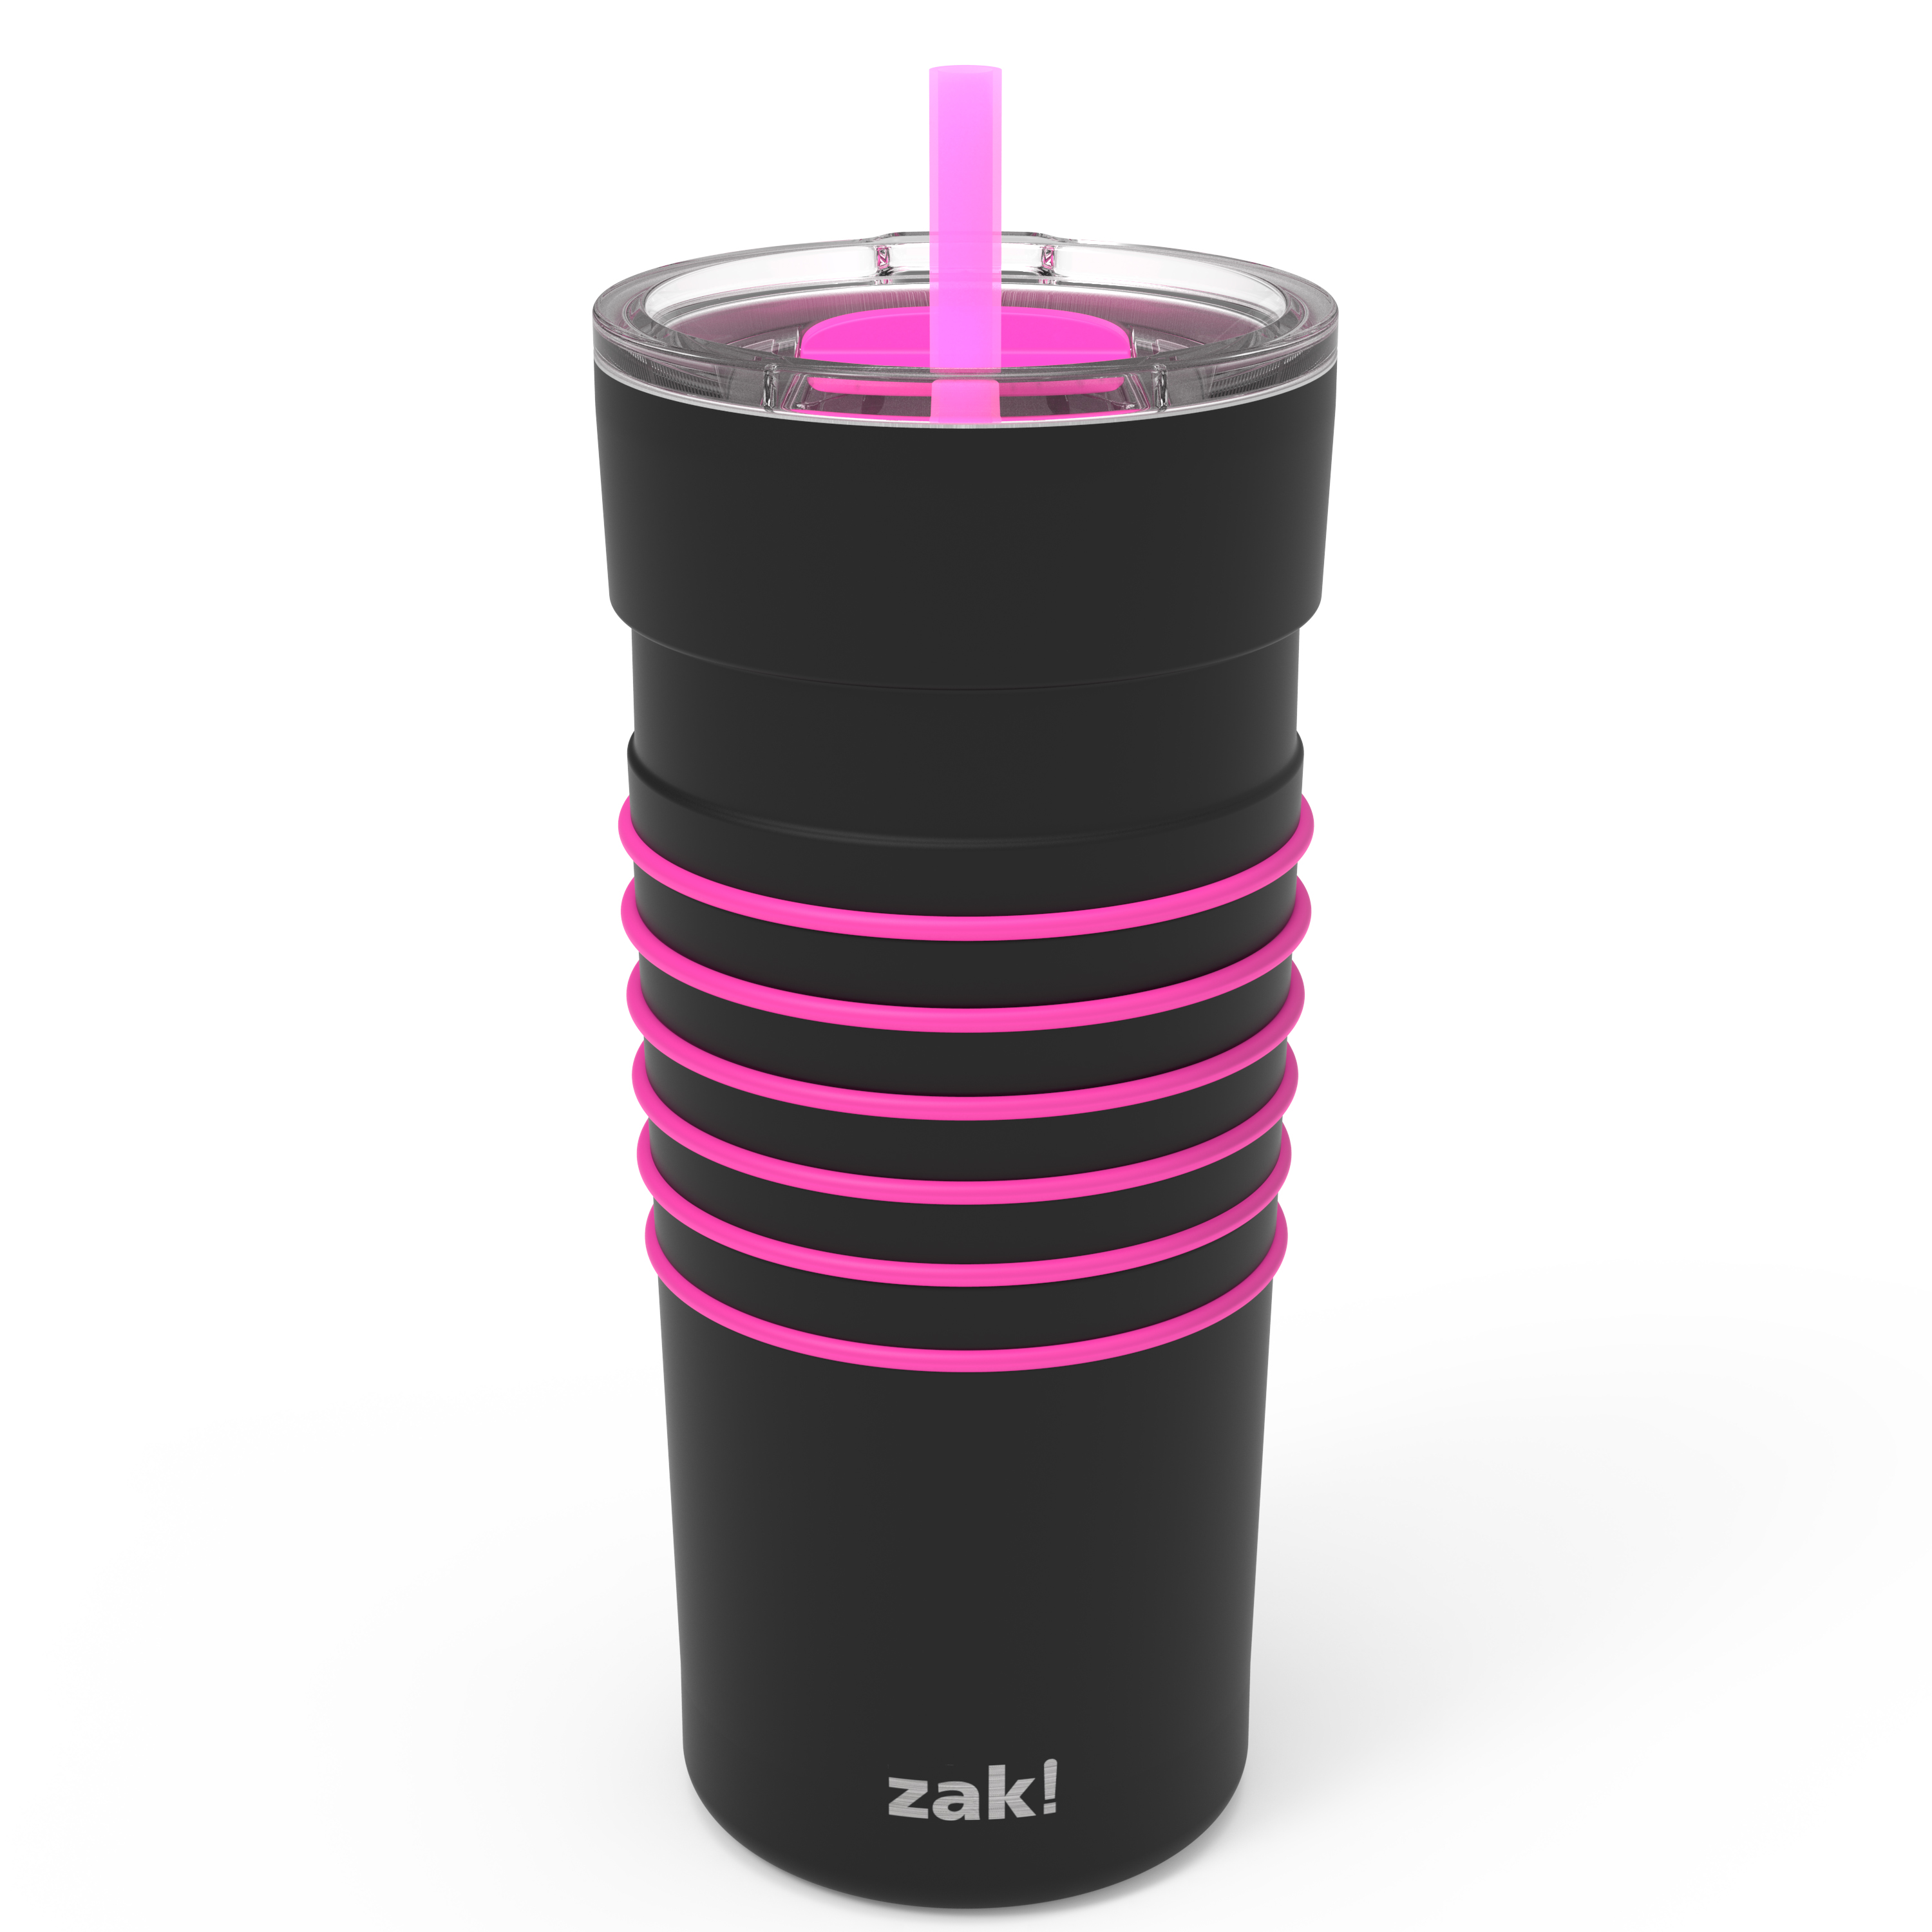 HydraTrak 20 ounce Vacuum Insulated Stainless Steel Tumbler, Black with Pink Rings slideshow image 2